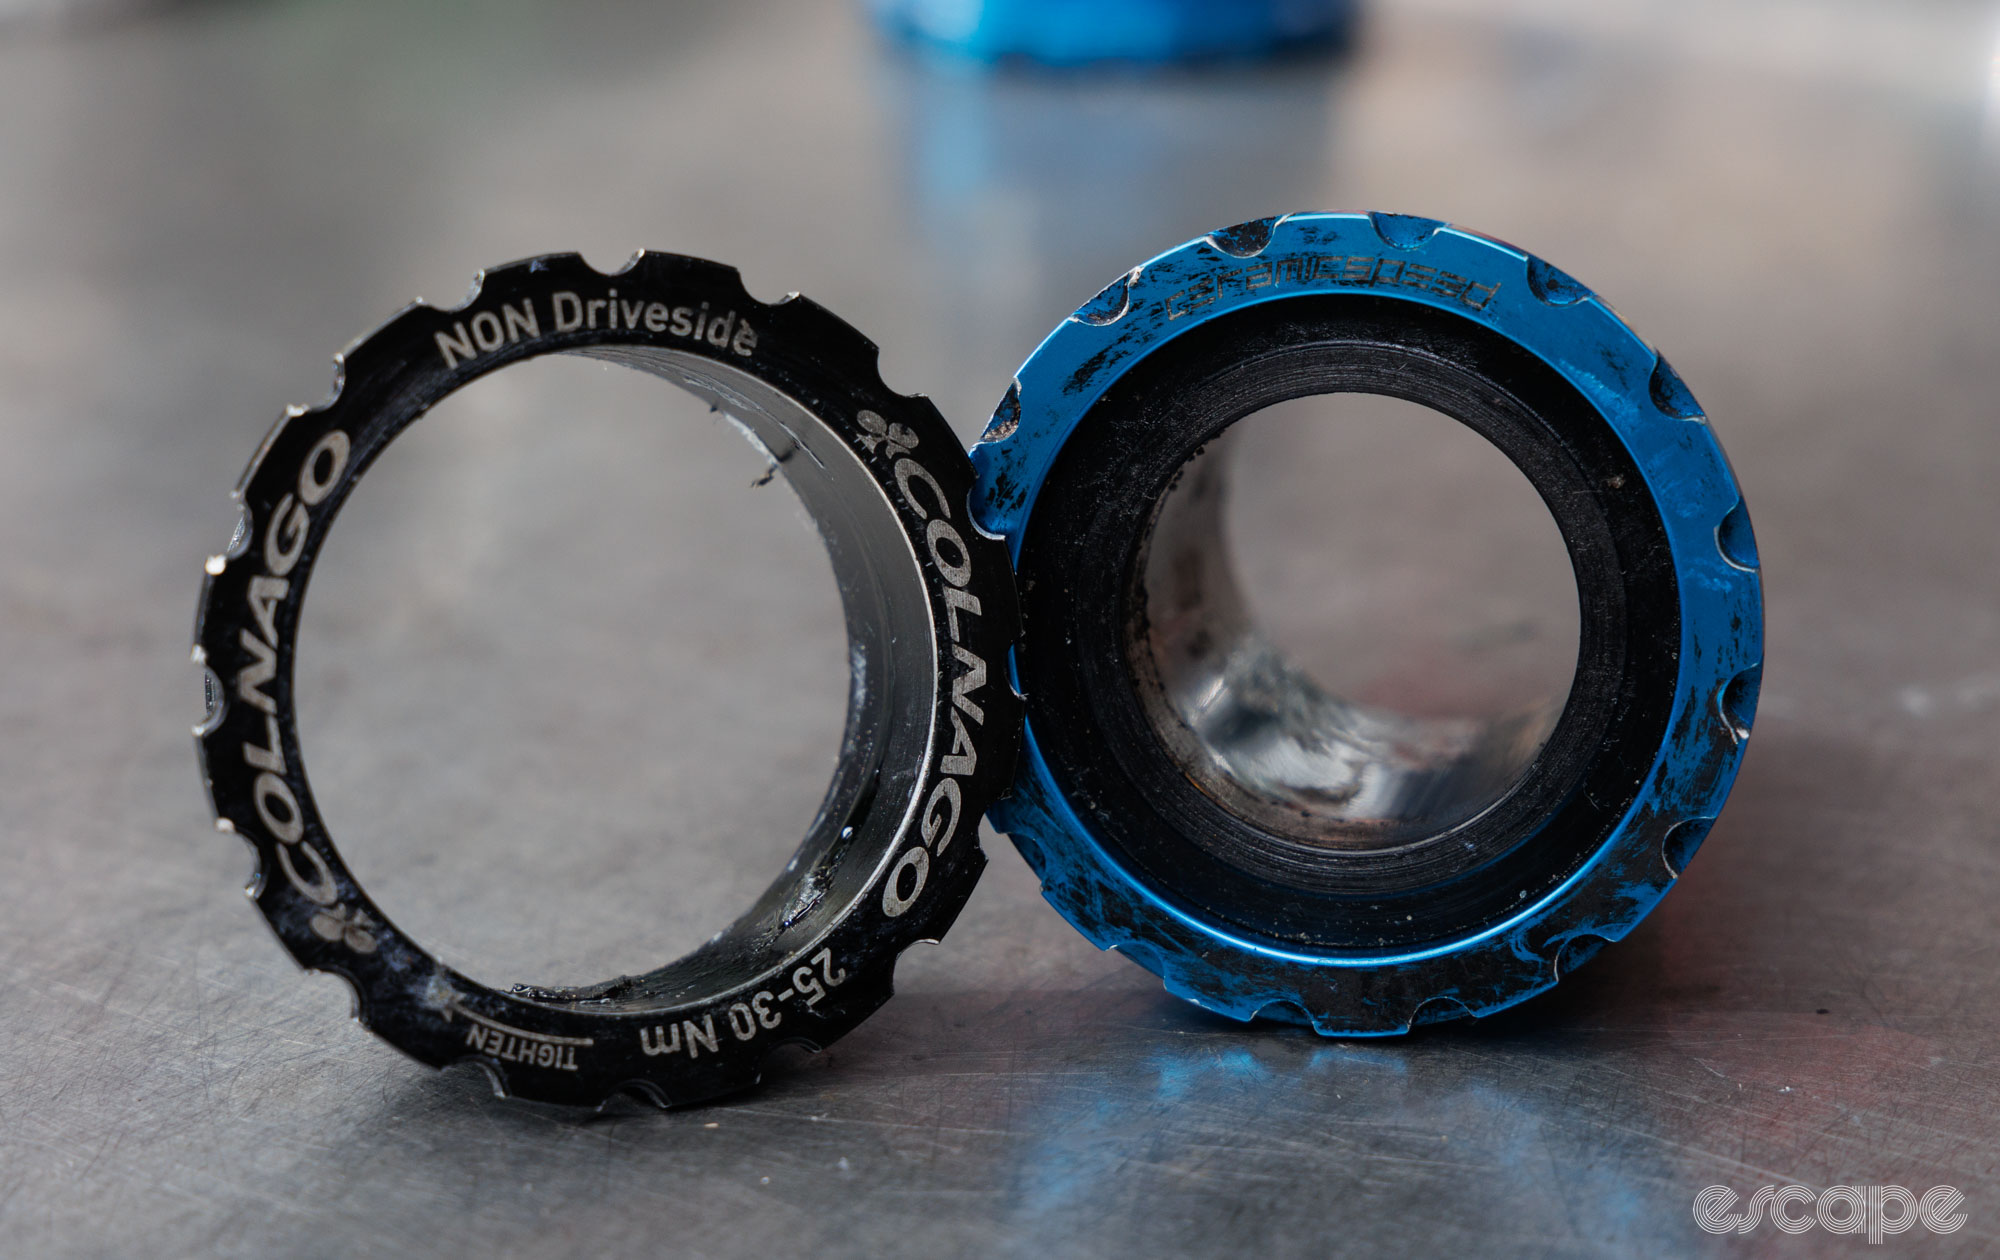 Colnago T45 cup on the left showing a spline without a backing plate. CeramicSpeed T47 Internal cup on the right, showing a bottom bracket cup with a backing plate. 